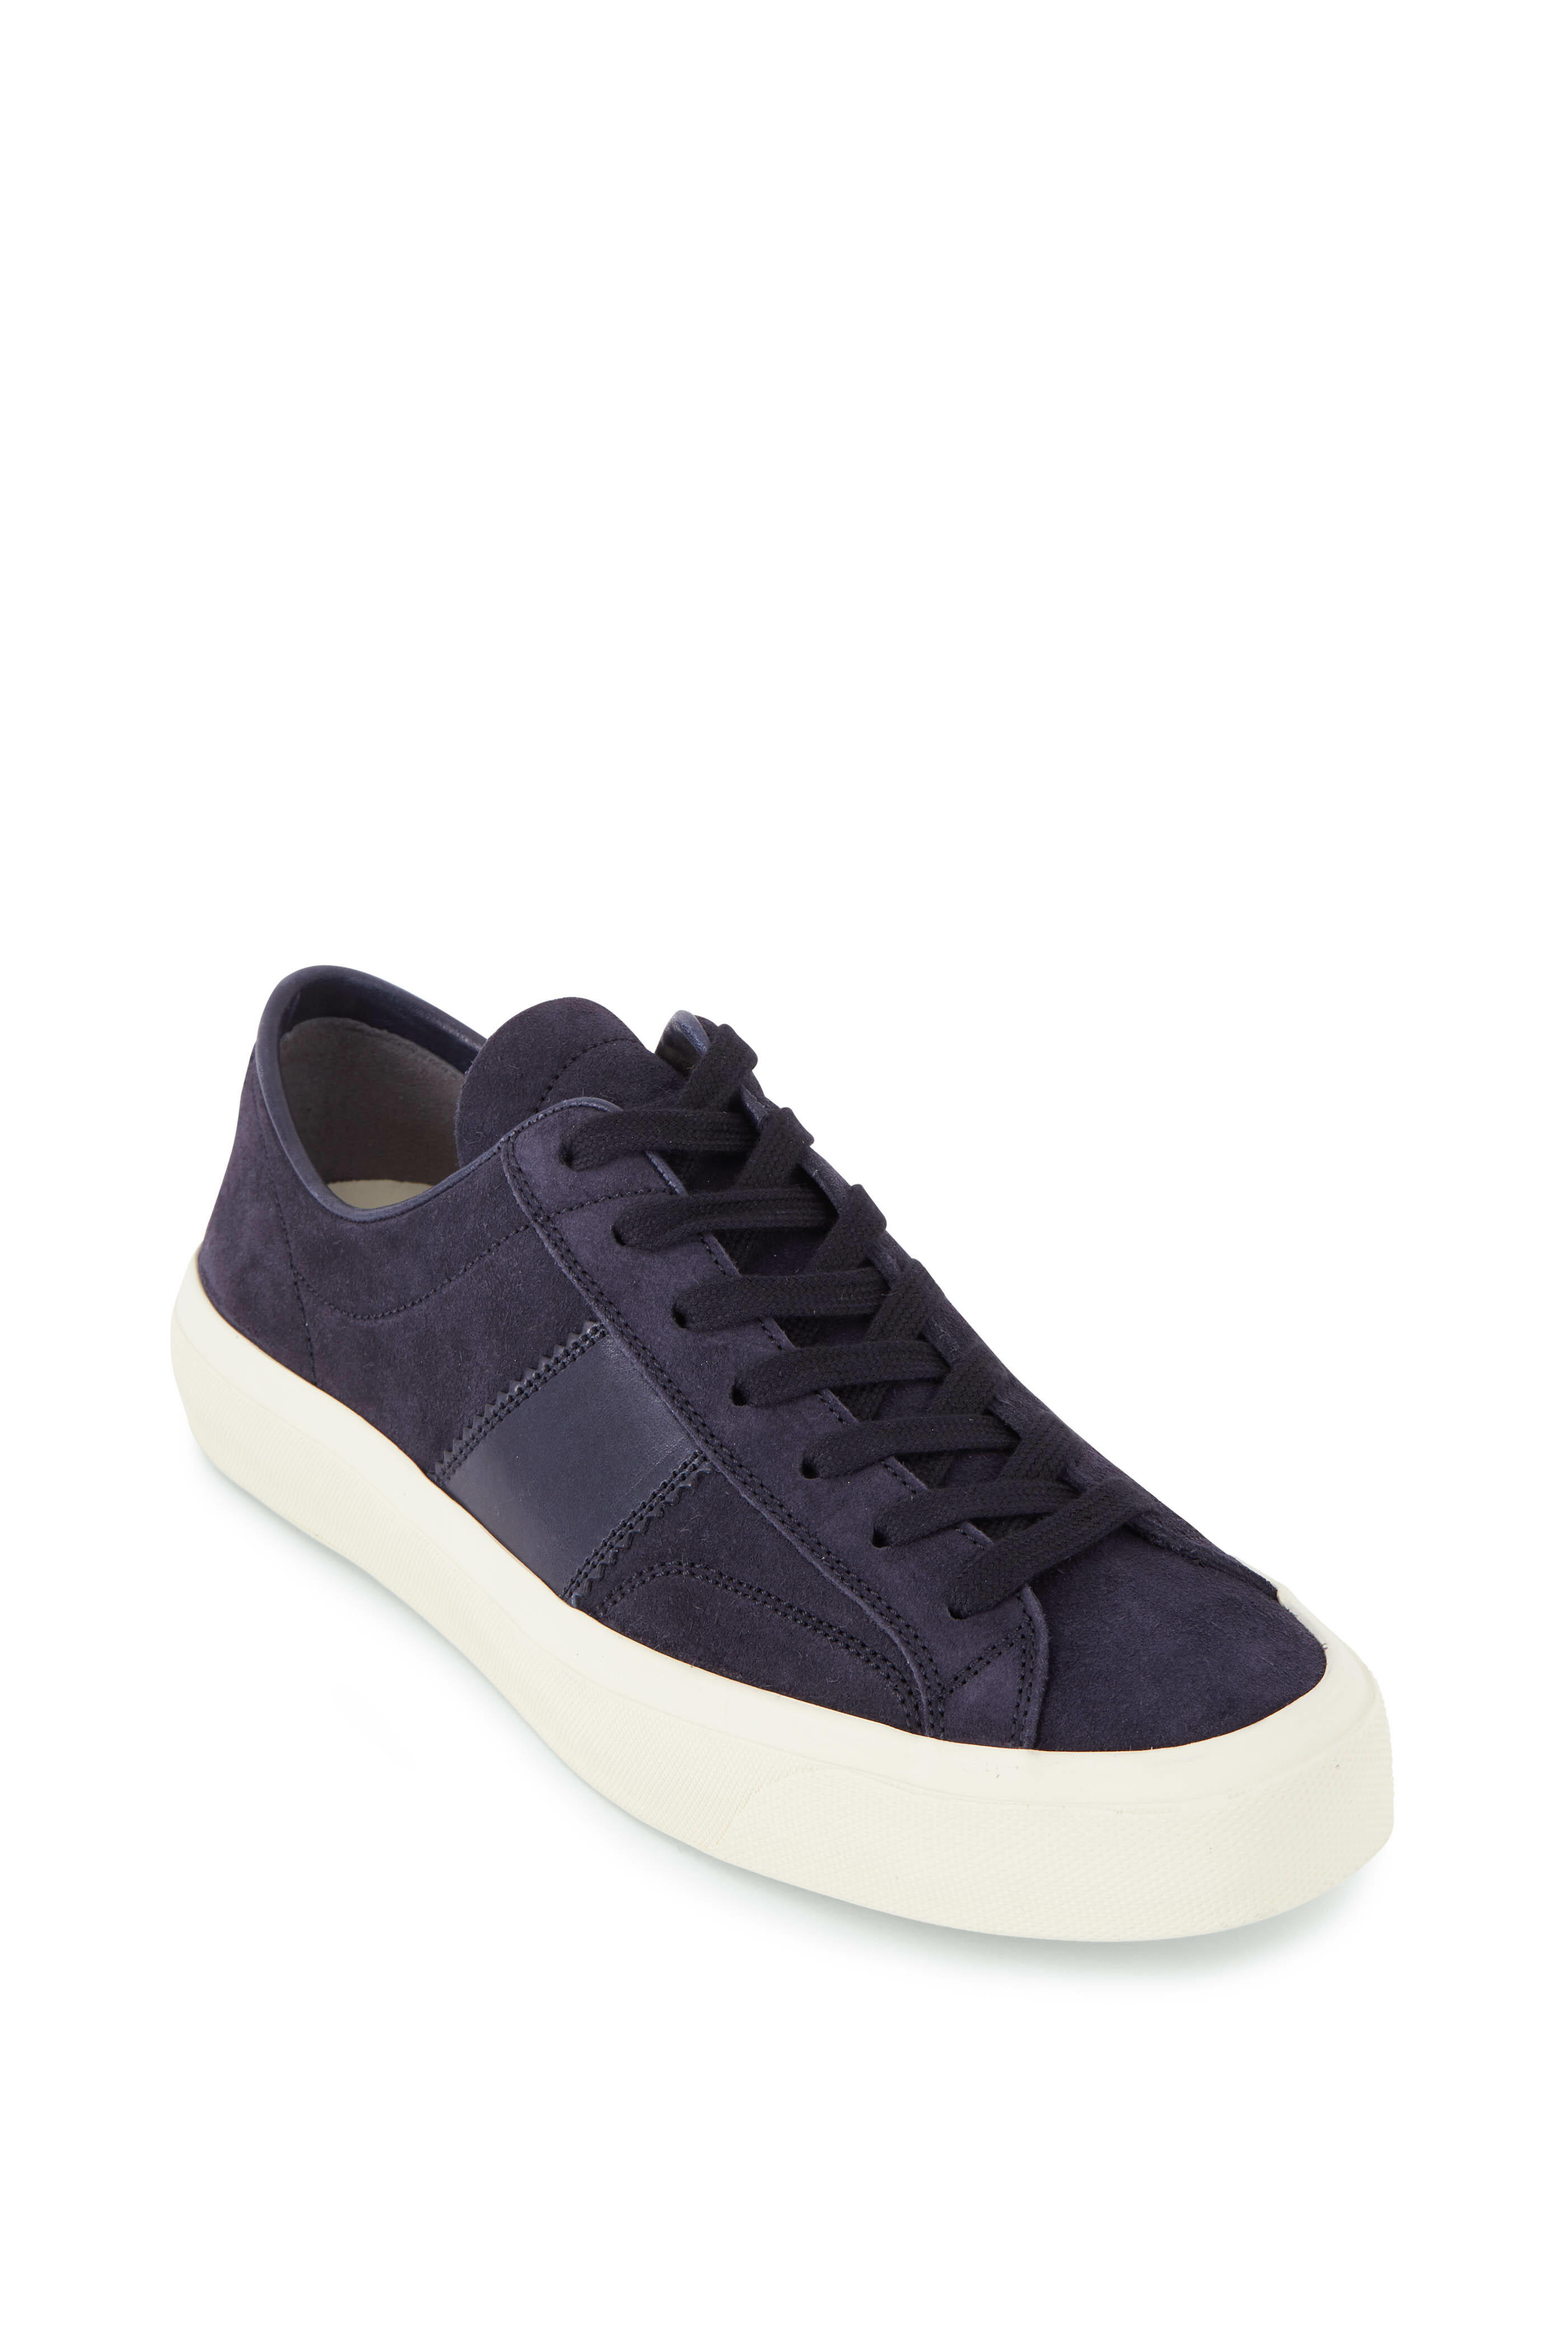 Tom Ford - Cambridge Navy Suede Low Top Sneaker | Mitchell Stores